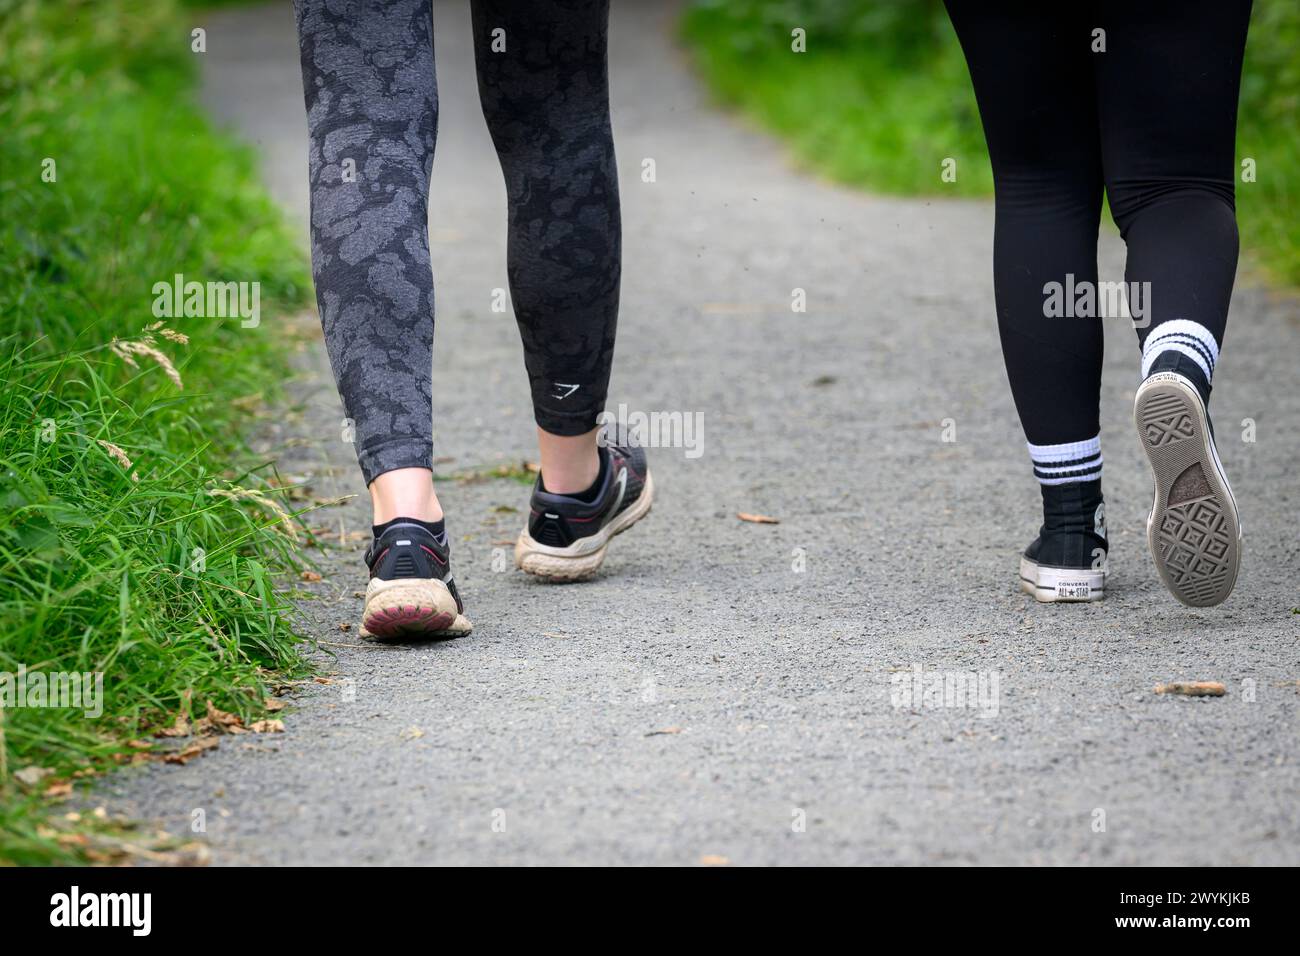 Paths for all, Loch Leven, Heritage Trail, young female walkers Stock Photo